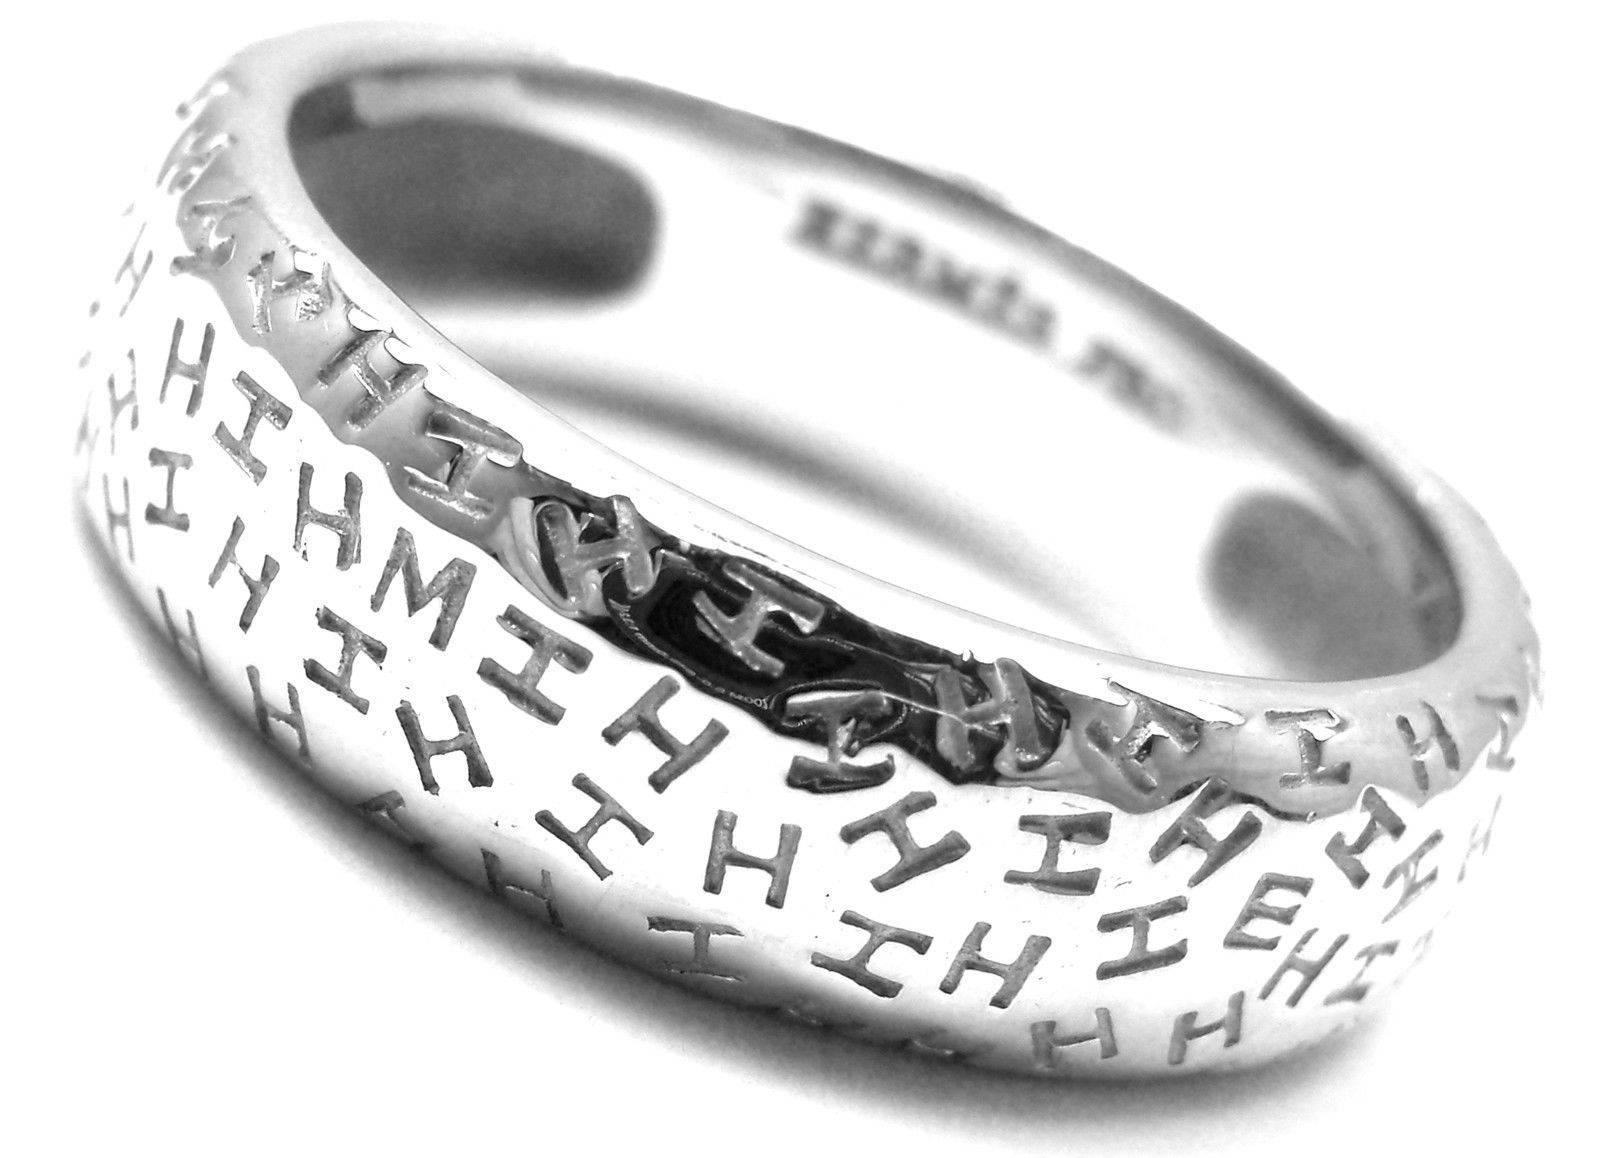 18k White Gold Graffiti H Band Ring by Hermes.

Details: 
Ring Size: European 59 US 8 3/4
Weight: 10.1 grams
Width: 7mm
Stamped Hallmarks: Hermes Au750 59 47350
*Free Shipping within the United States*

YOUR PRICE: $1,200

T1126rmd